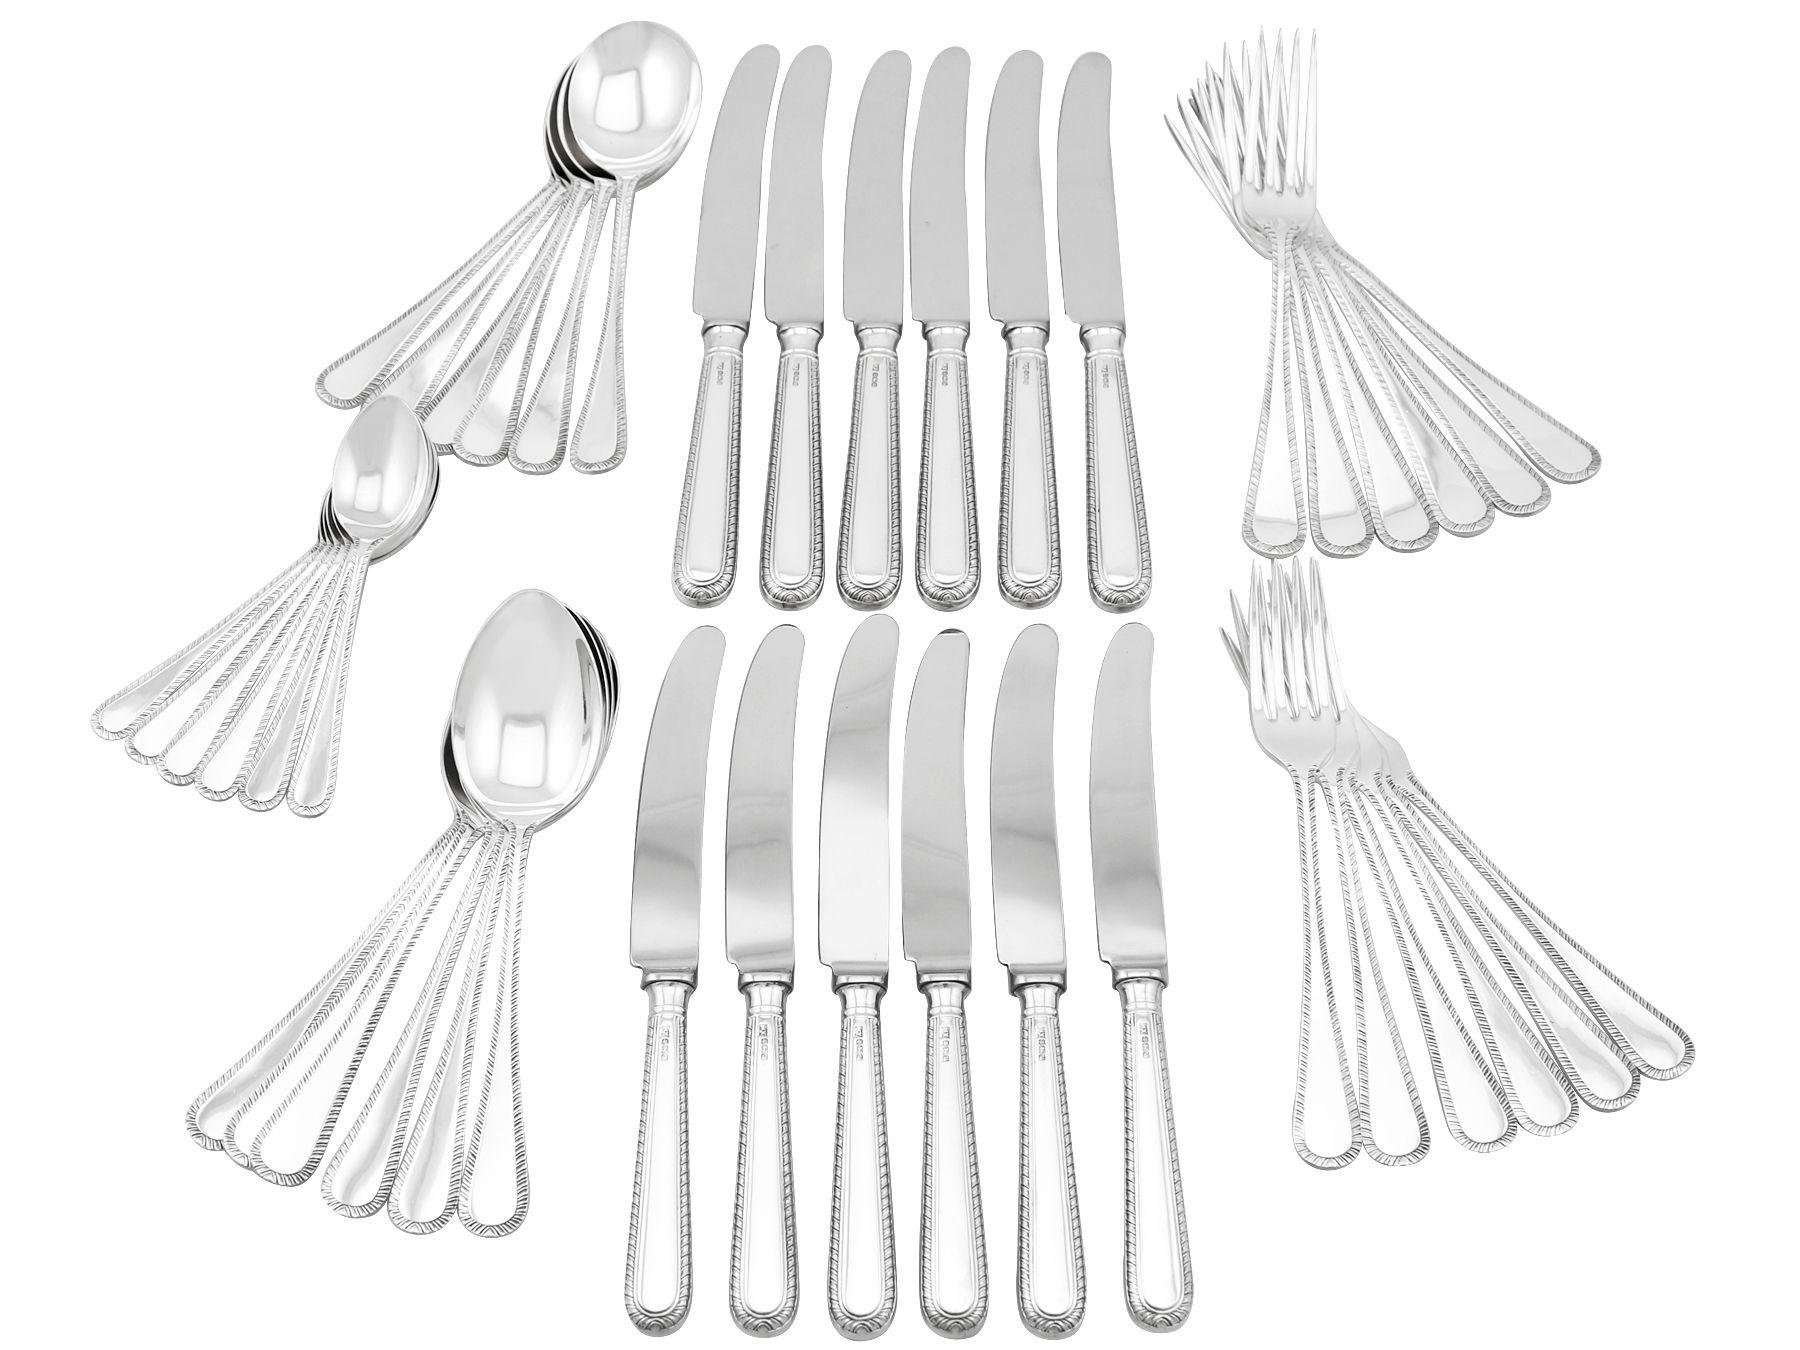 An exceptional, fine and impressive vintage Elizabeth II English sterling silver straight feather edge pattern canteen of cutlery for six persons; an addition to our flatware collection

The pieces of this exceptional vintage straight sterling